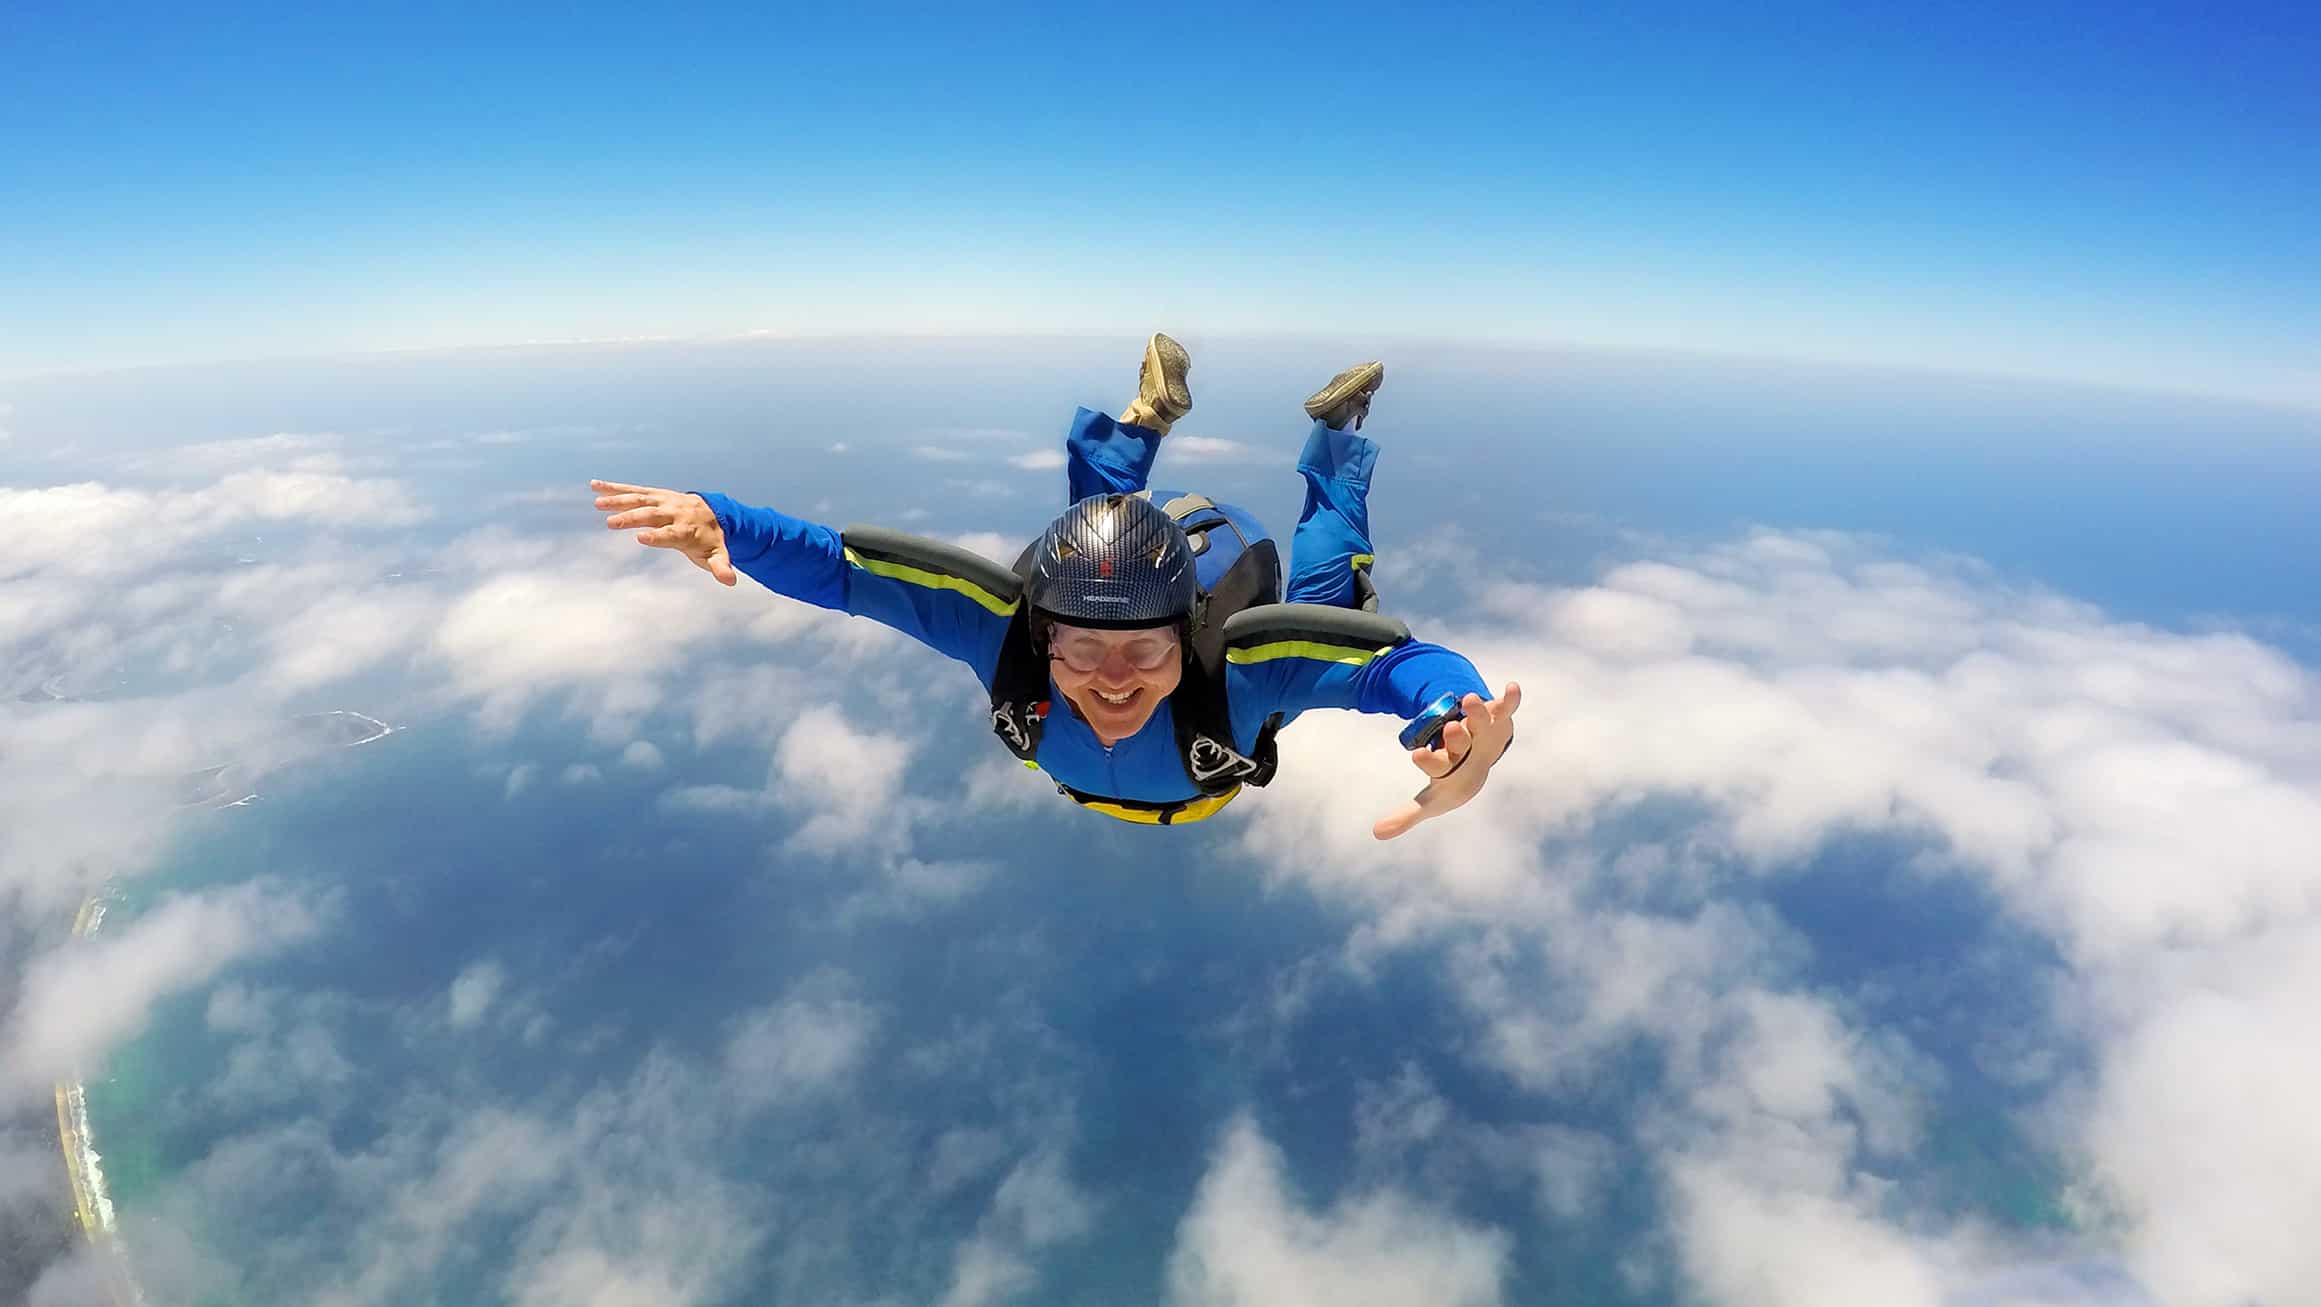 Australian Skydive Licenses Explained - What you need to know.